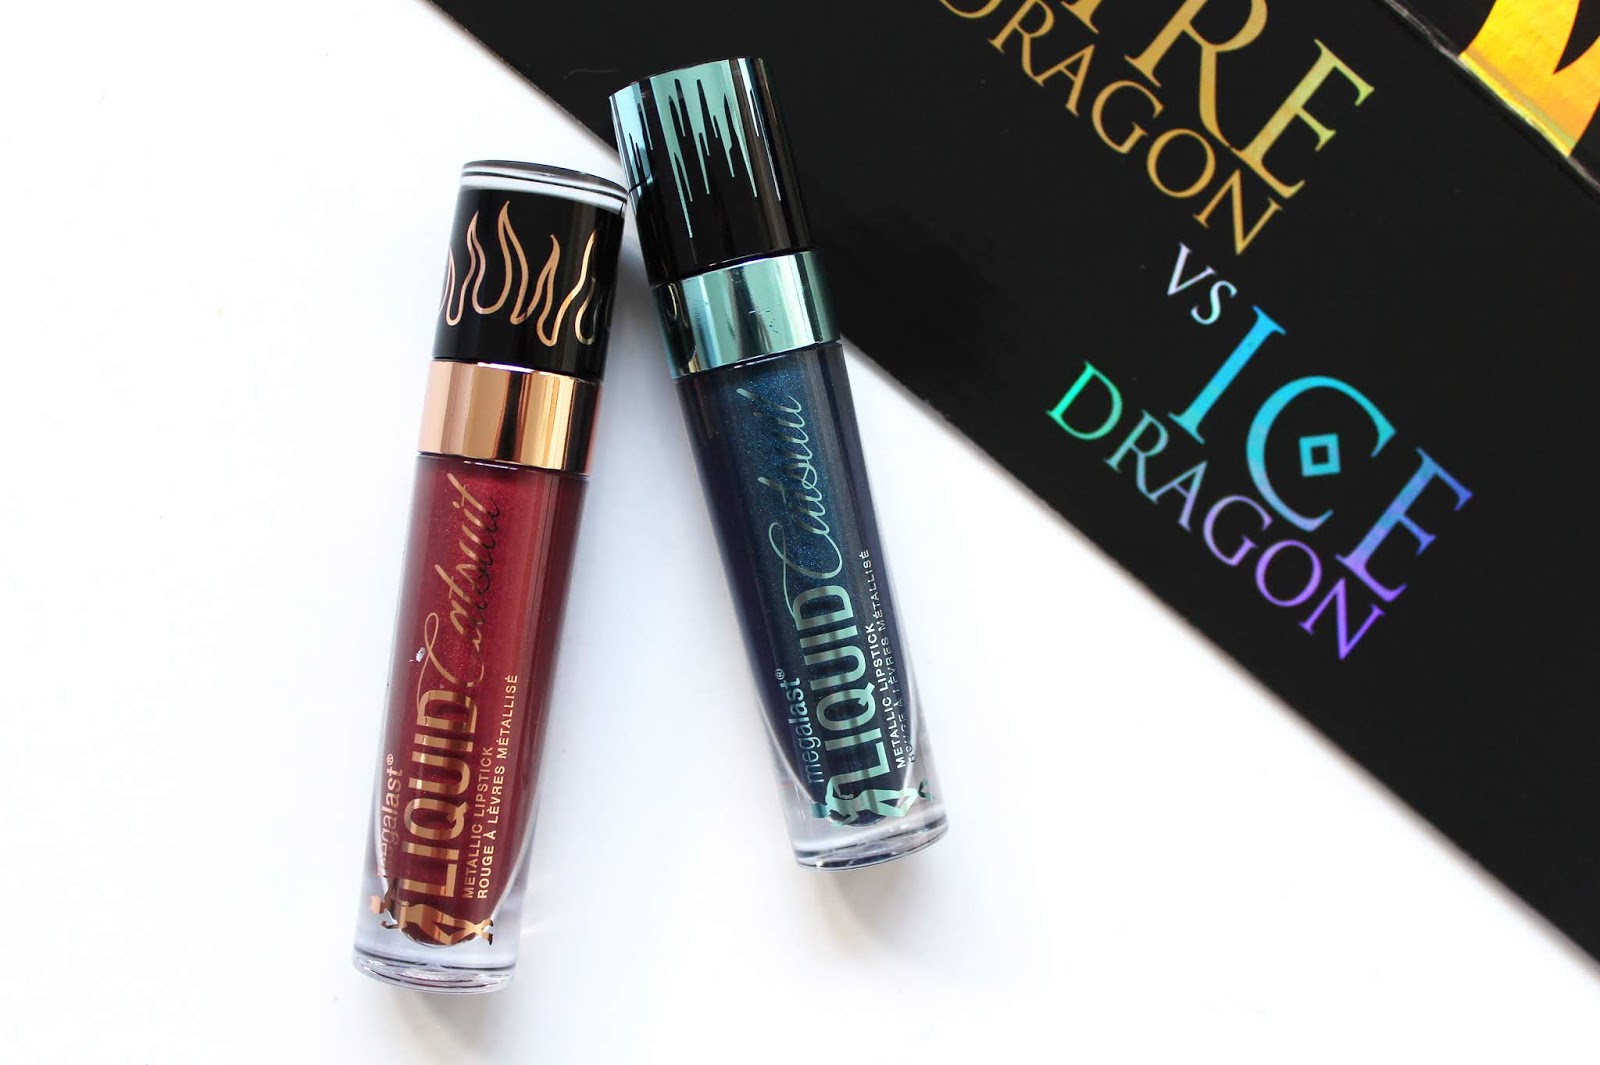 WET N WILD | Fire Dragon Vs. Ice Dragon Limited Edition Collection - CassandraMyee